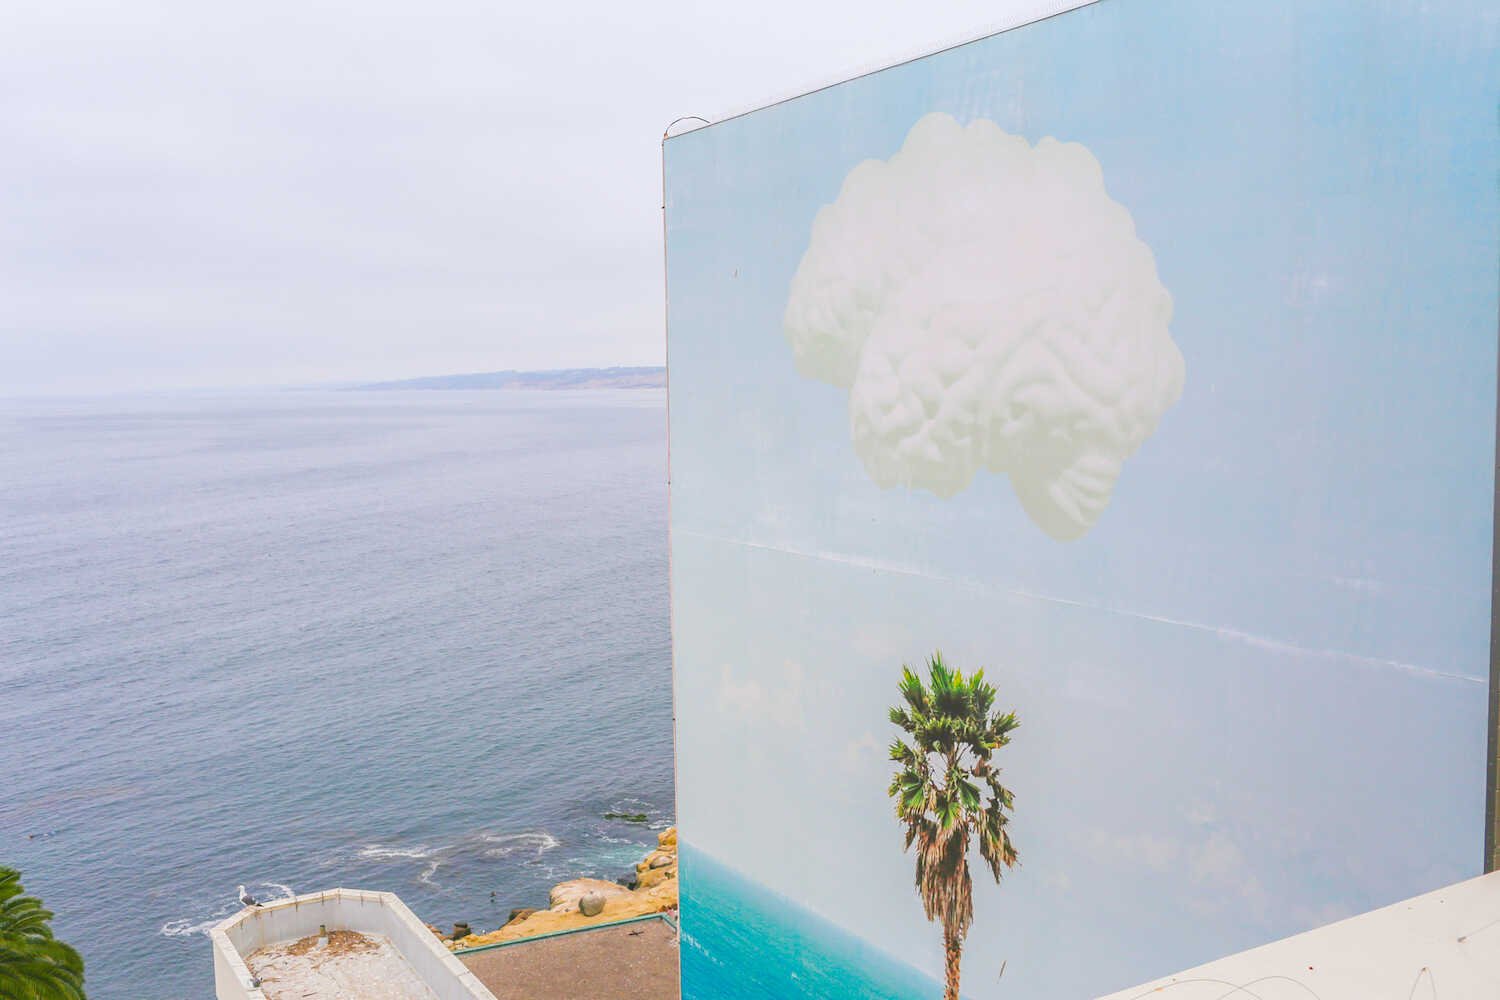 Weekend Guide to La Jolla - View of the John Baldessari's Brain/Cloud mural from George’s at the Cove.